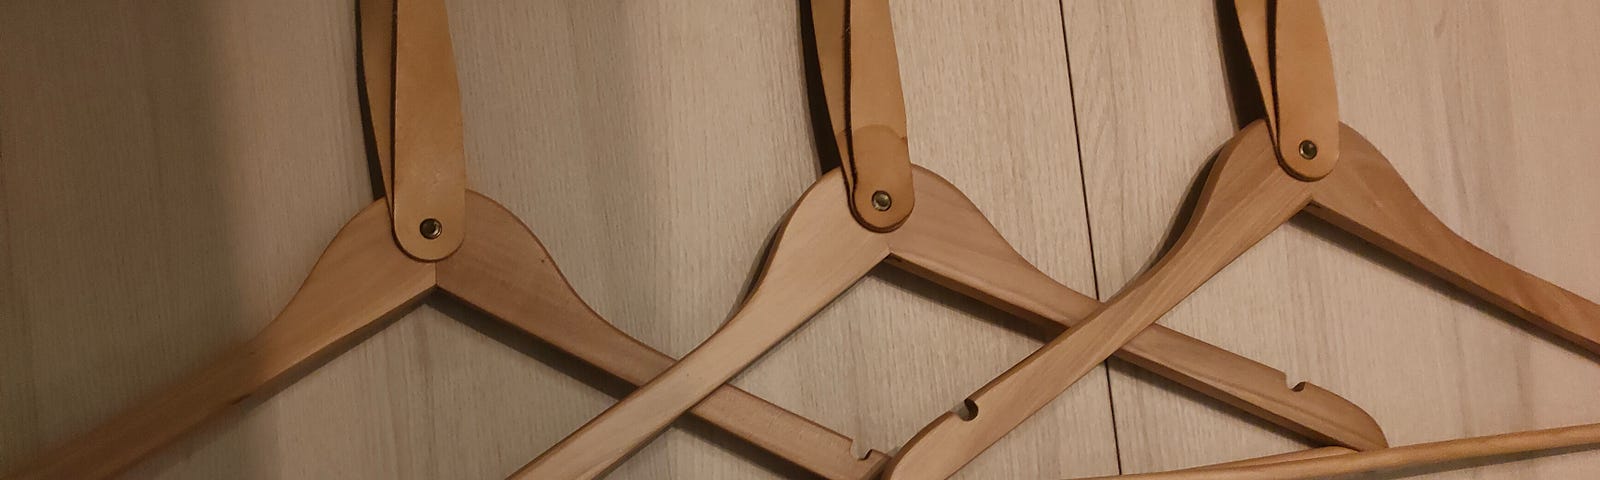 Cloths hangers are are hung, though nothing is hung on them. There is false wood tapestry in the background behind the hangers.